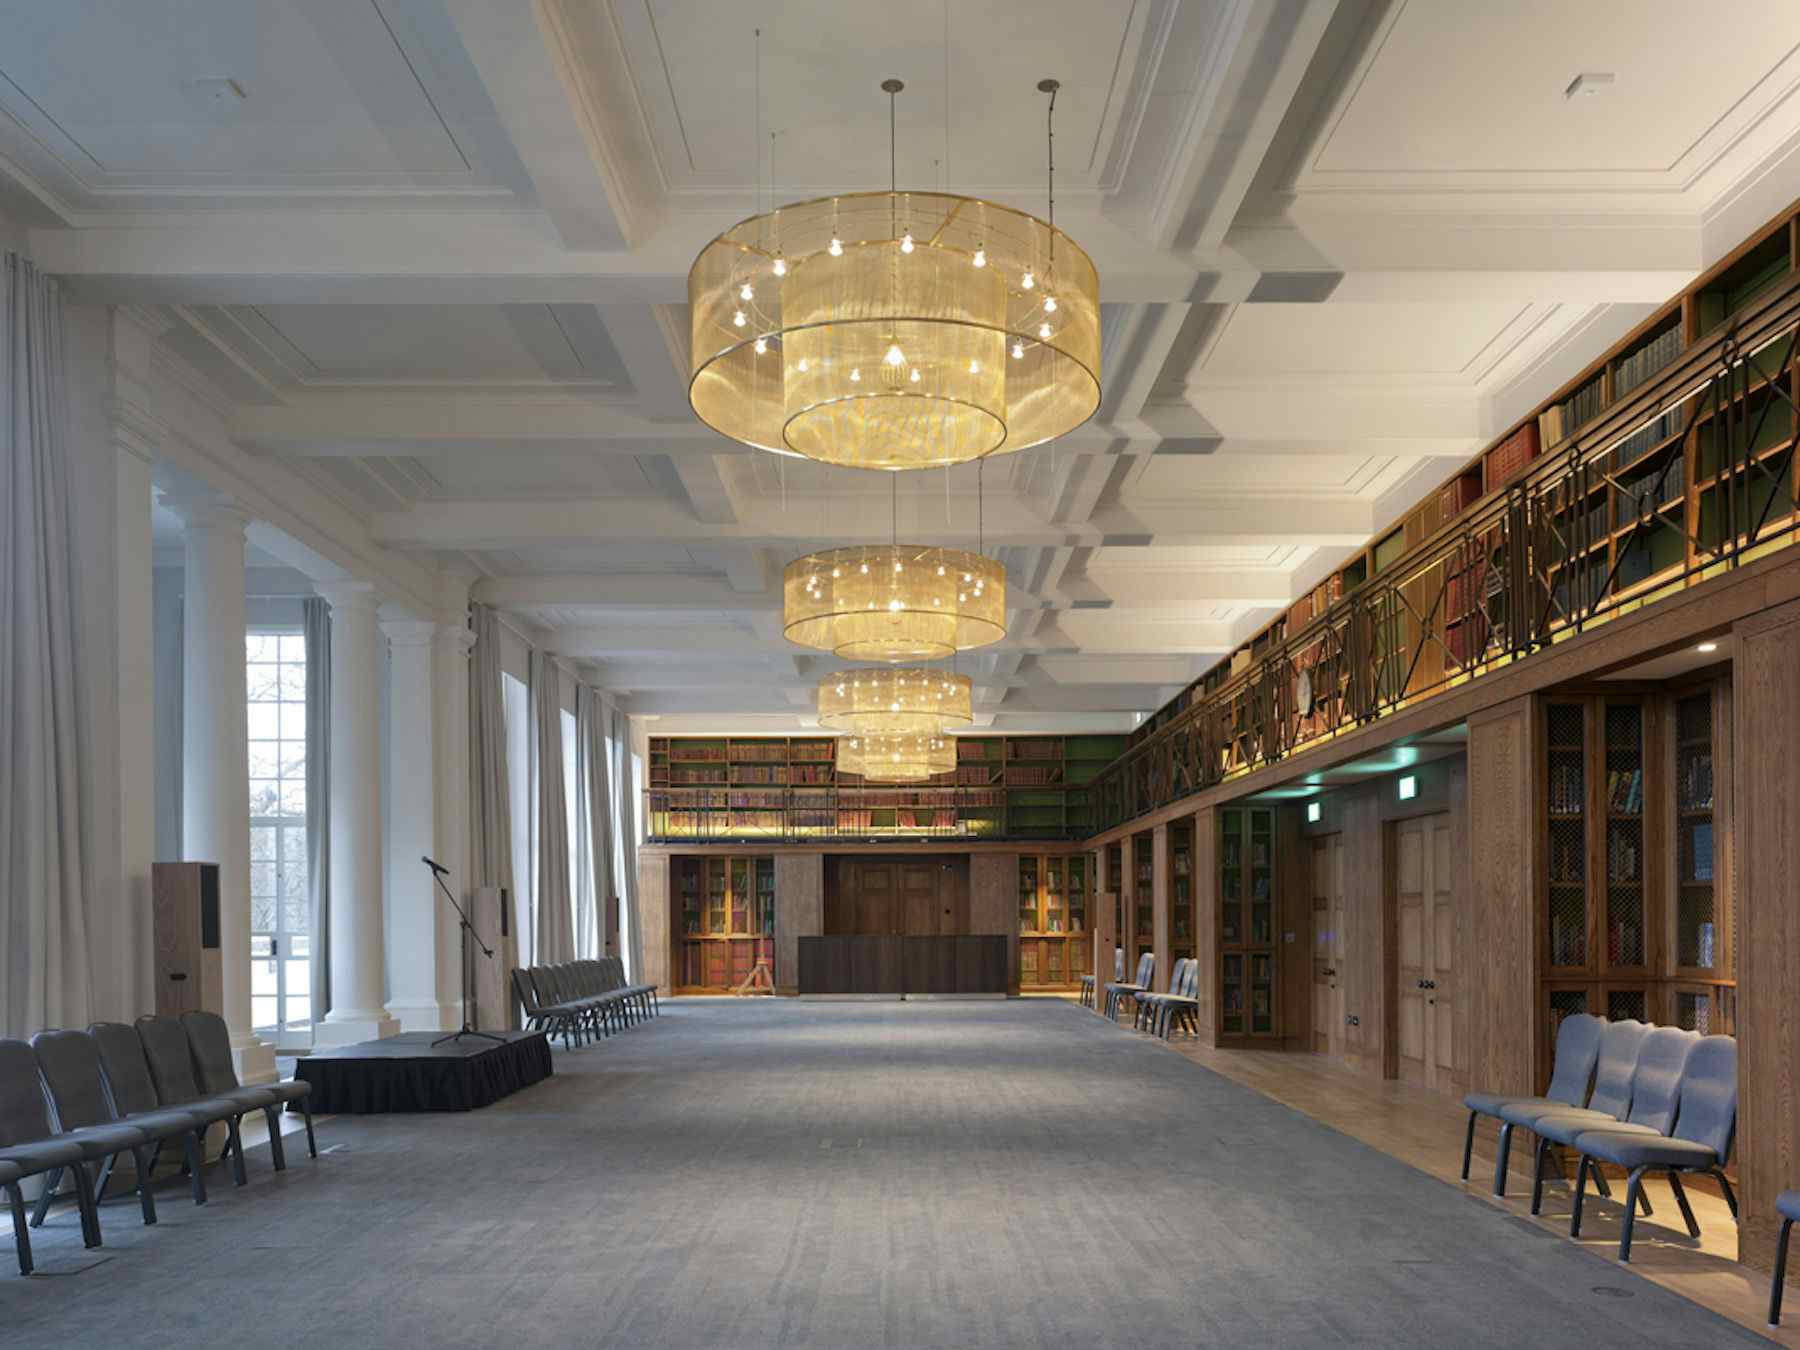 Maxwell Library, IET London: Savoy Place